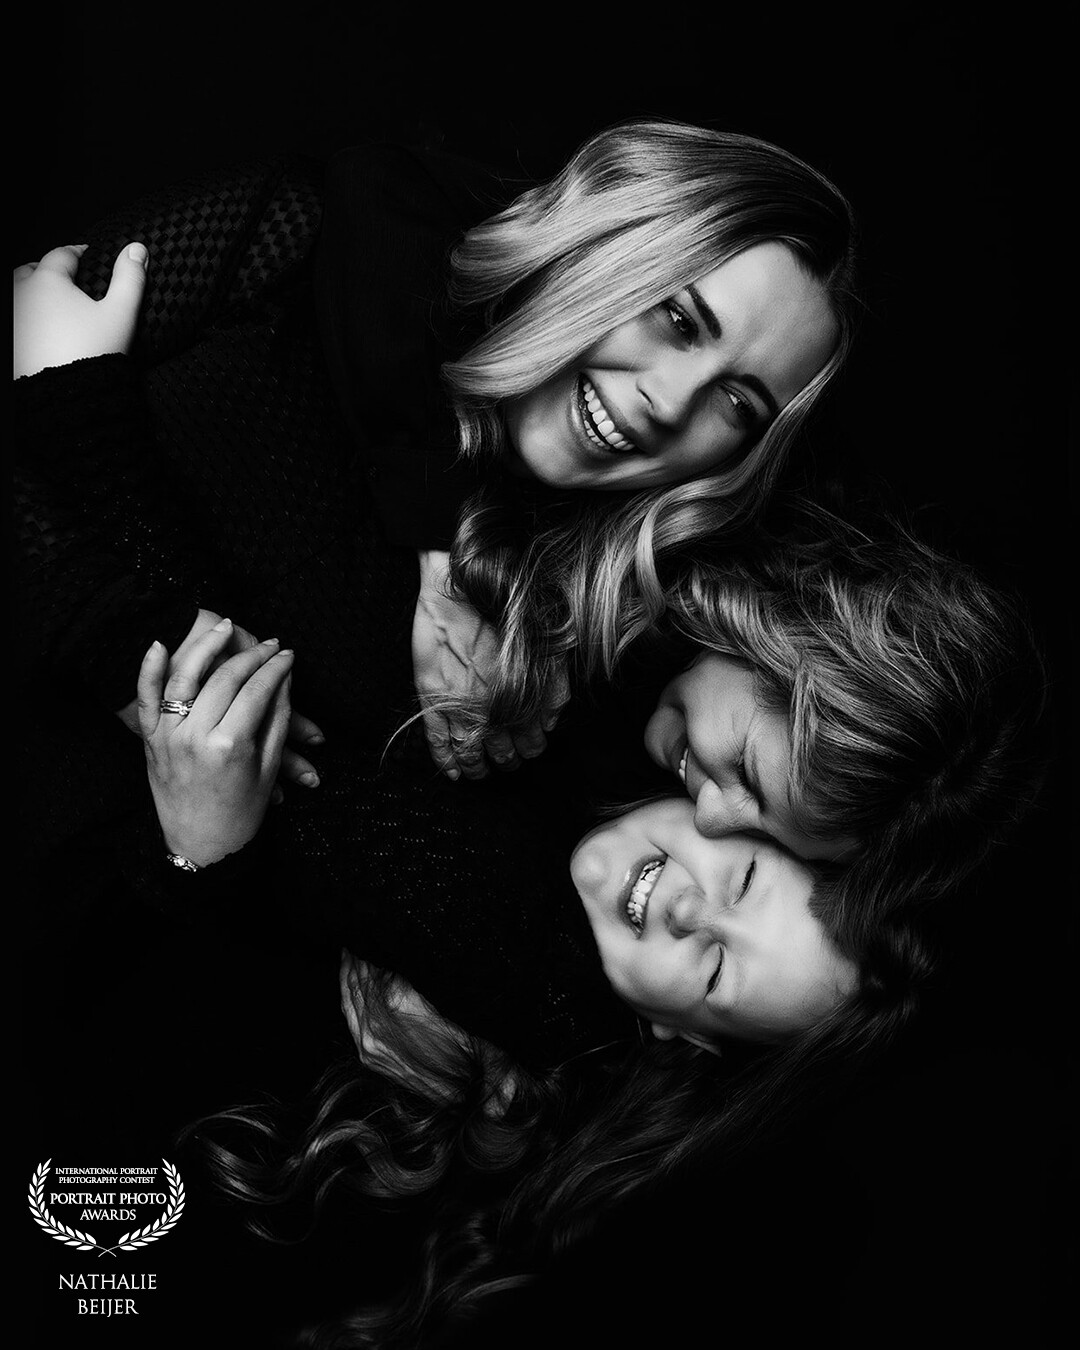 Nothing is more beautiful than the love between a mother and her daughters. This photo was taken during a Mother's Day photo shoot. The cosiness splashes off when you look at the photos. A valuable moment to cherish.